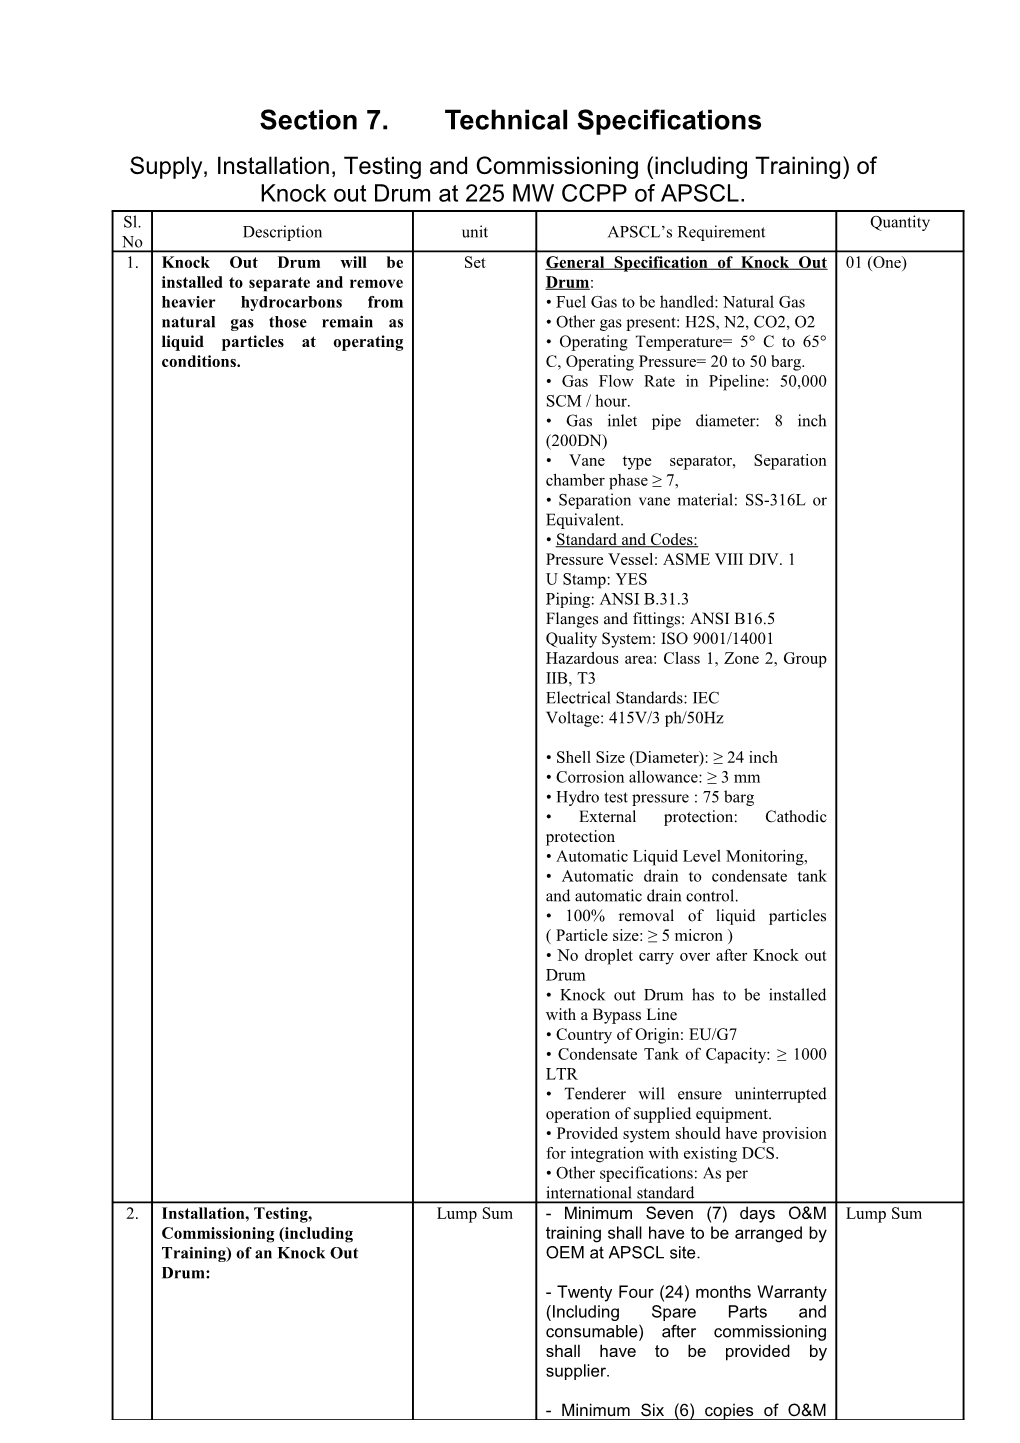 Section 7.Technical Specifications